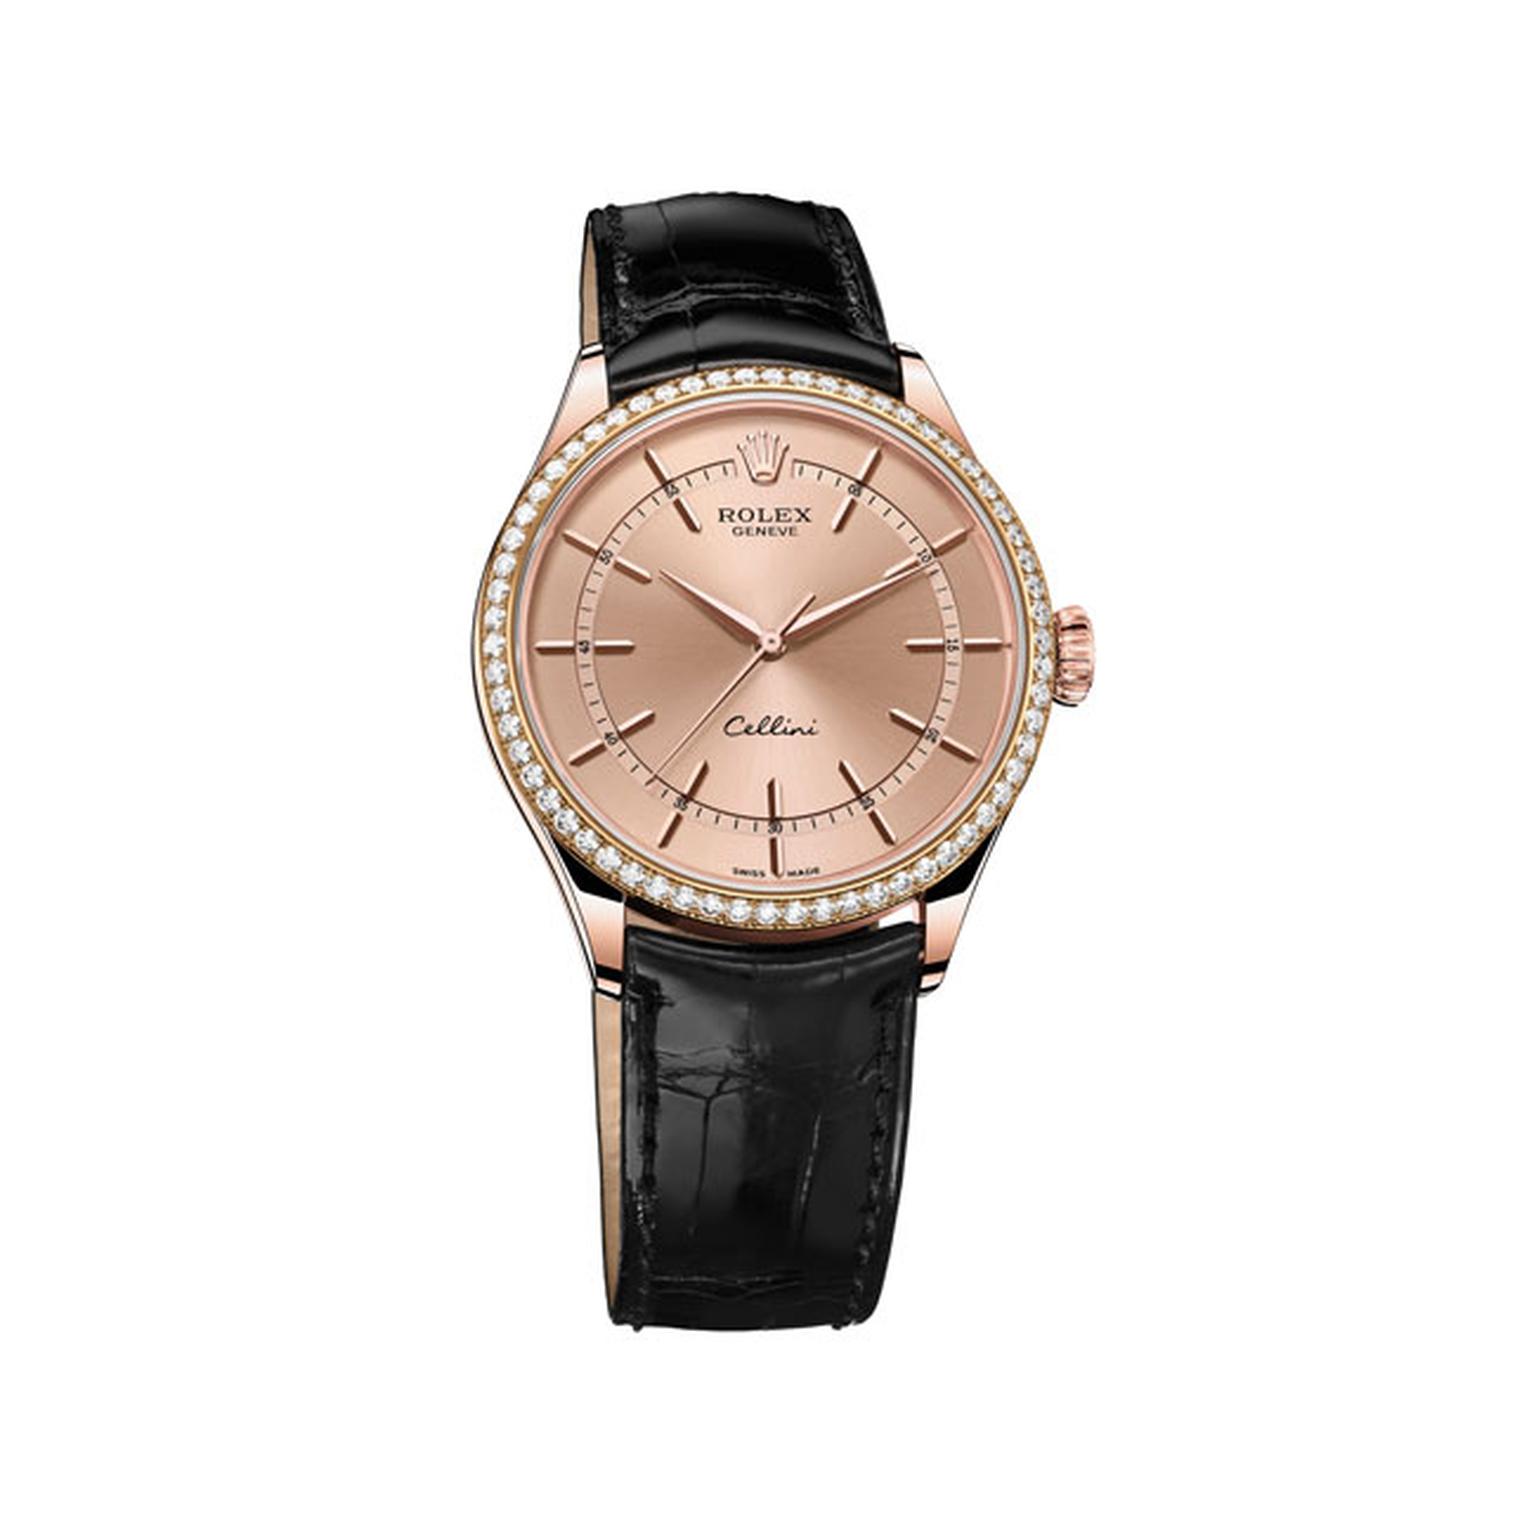 Rolex Cellini Rose Gold and diamond watch_main